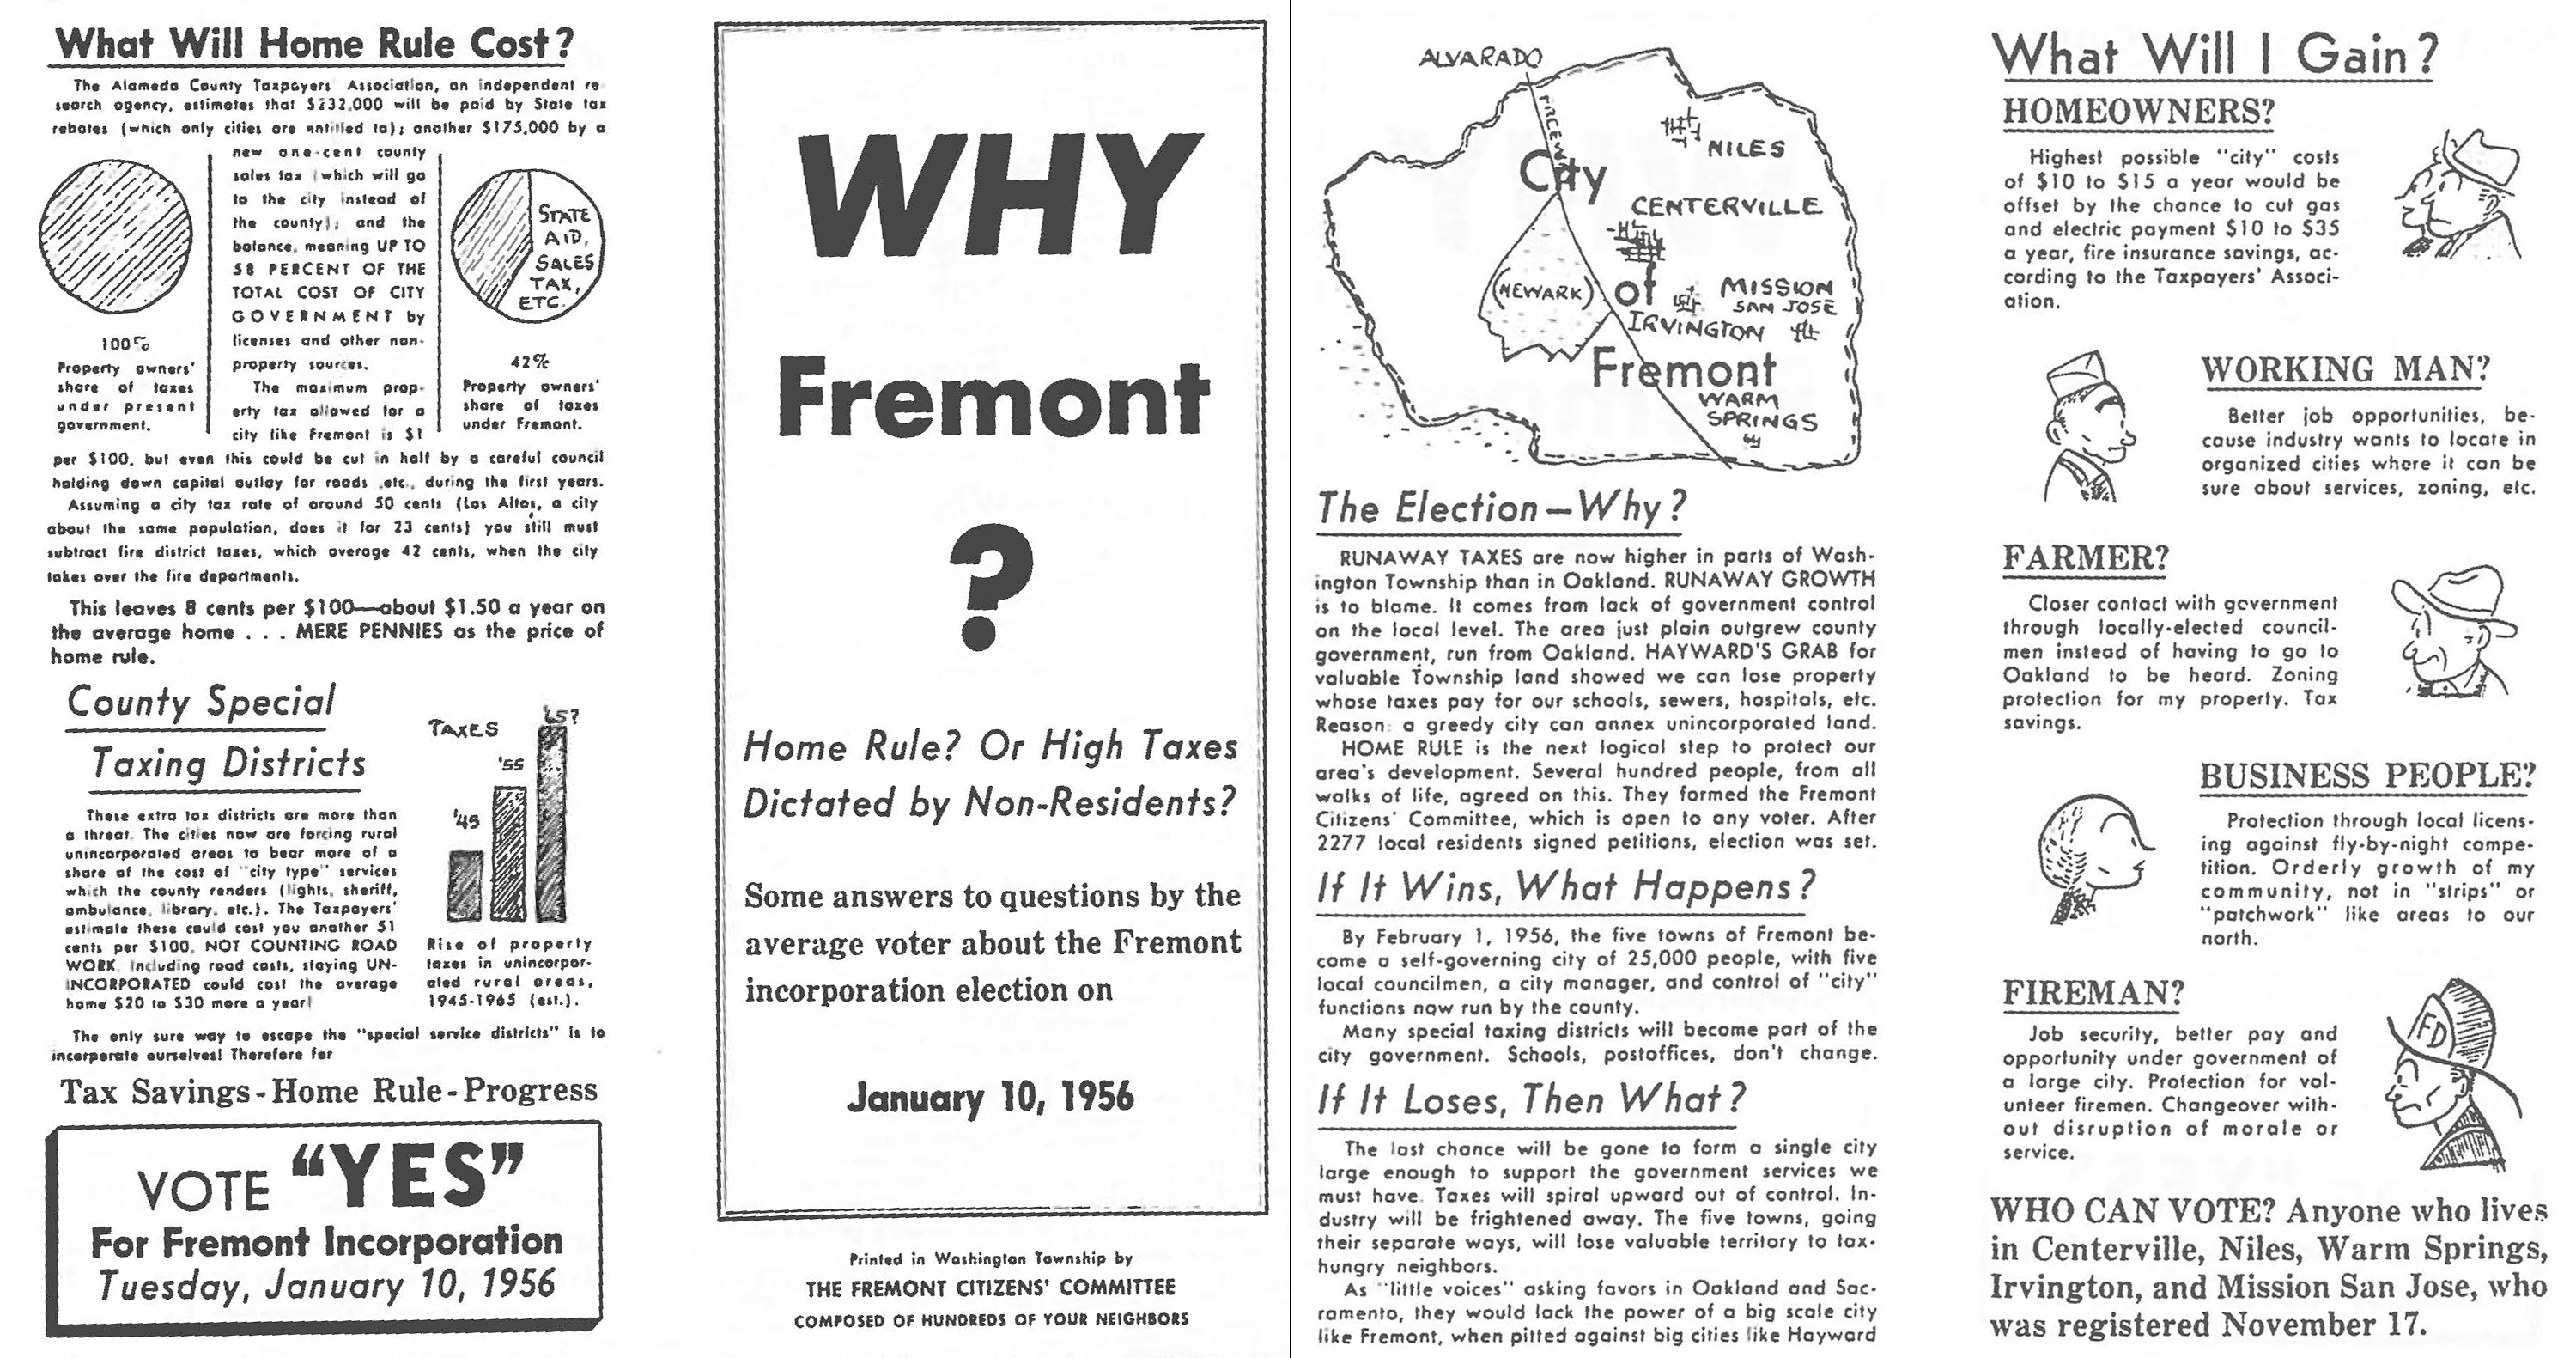 photo: A Fremont Citizen’s Committee flier advocating for Fremont’s incorporation. Courtesy of Mission Peak Heritage Foundation and Washington Township Museum of Local History.